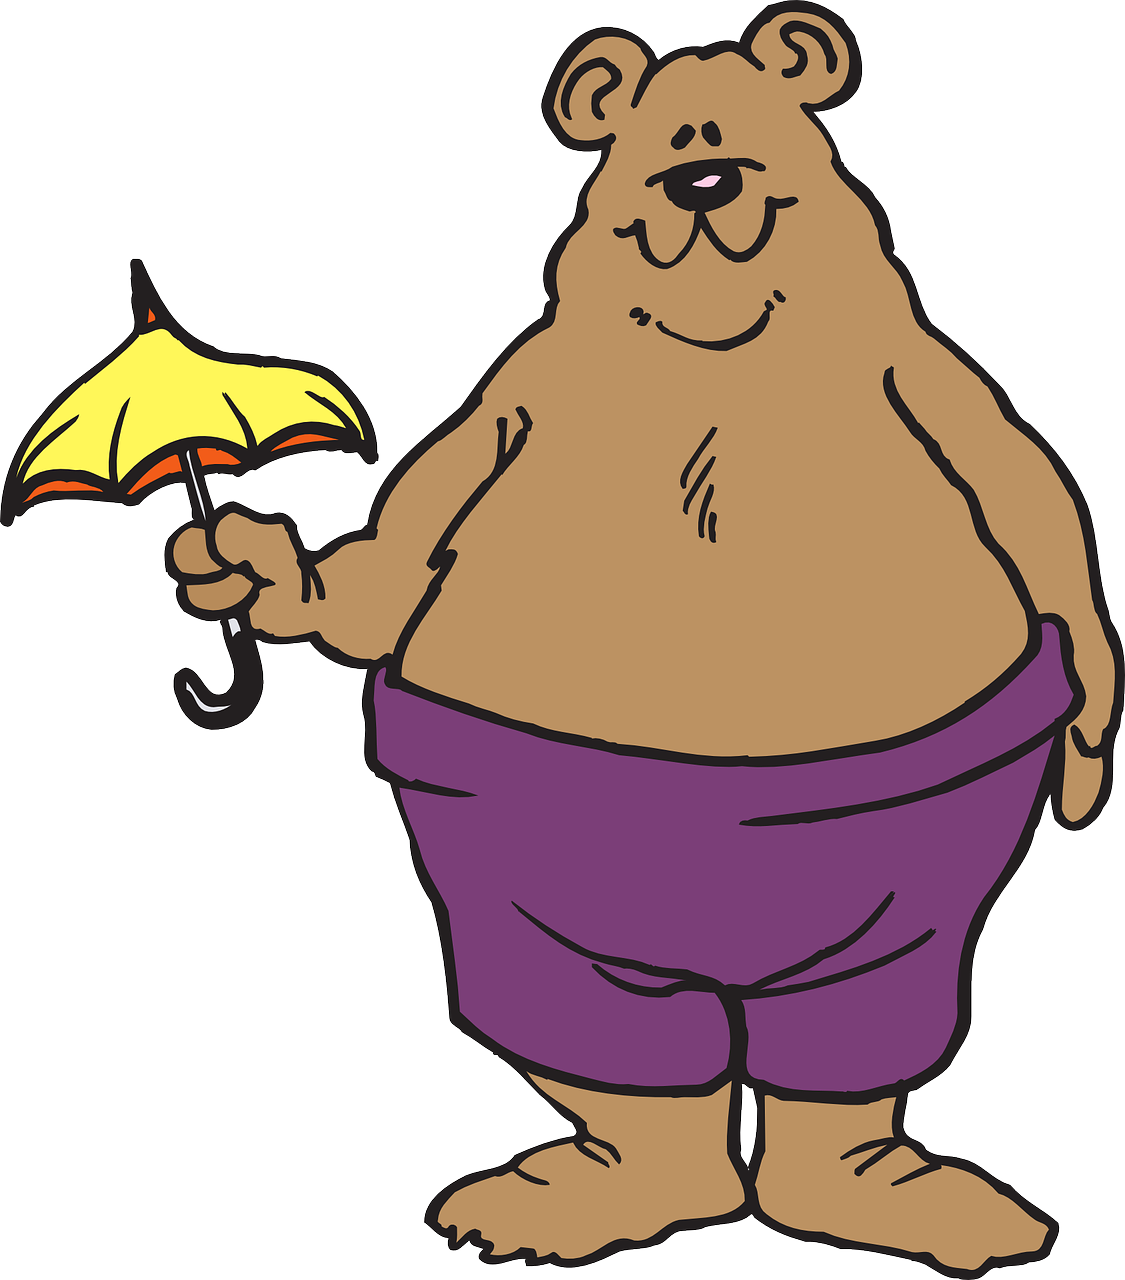 small,umbrella,big,bear,cute,holding,standing,free vector graphics,free pictures, free photos, free images, royalty free, free illustrations, public domain